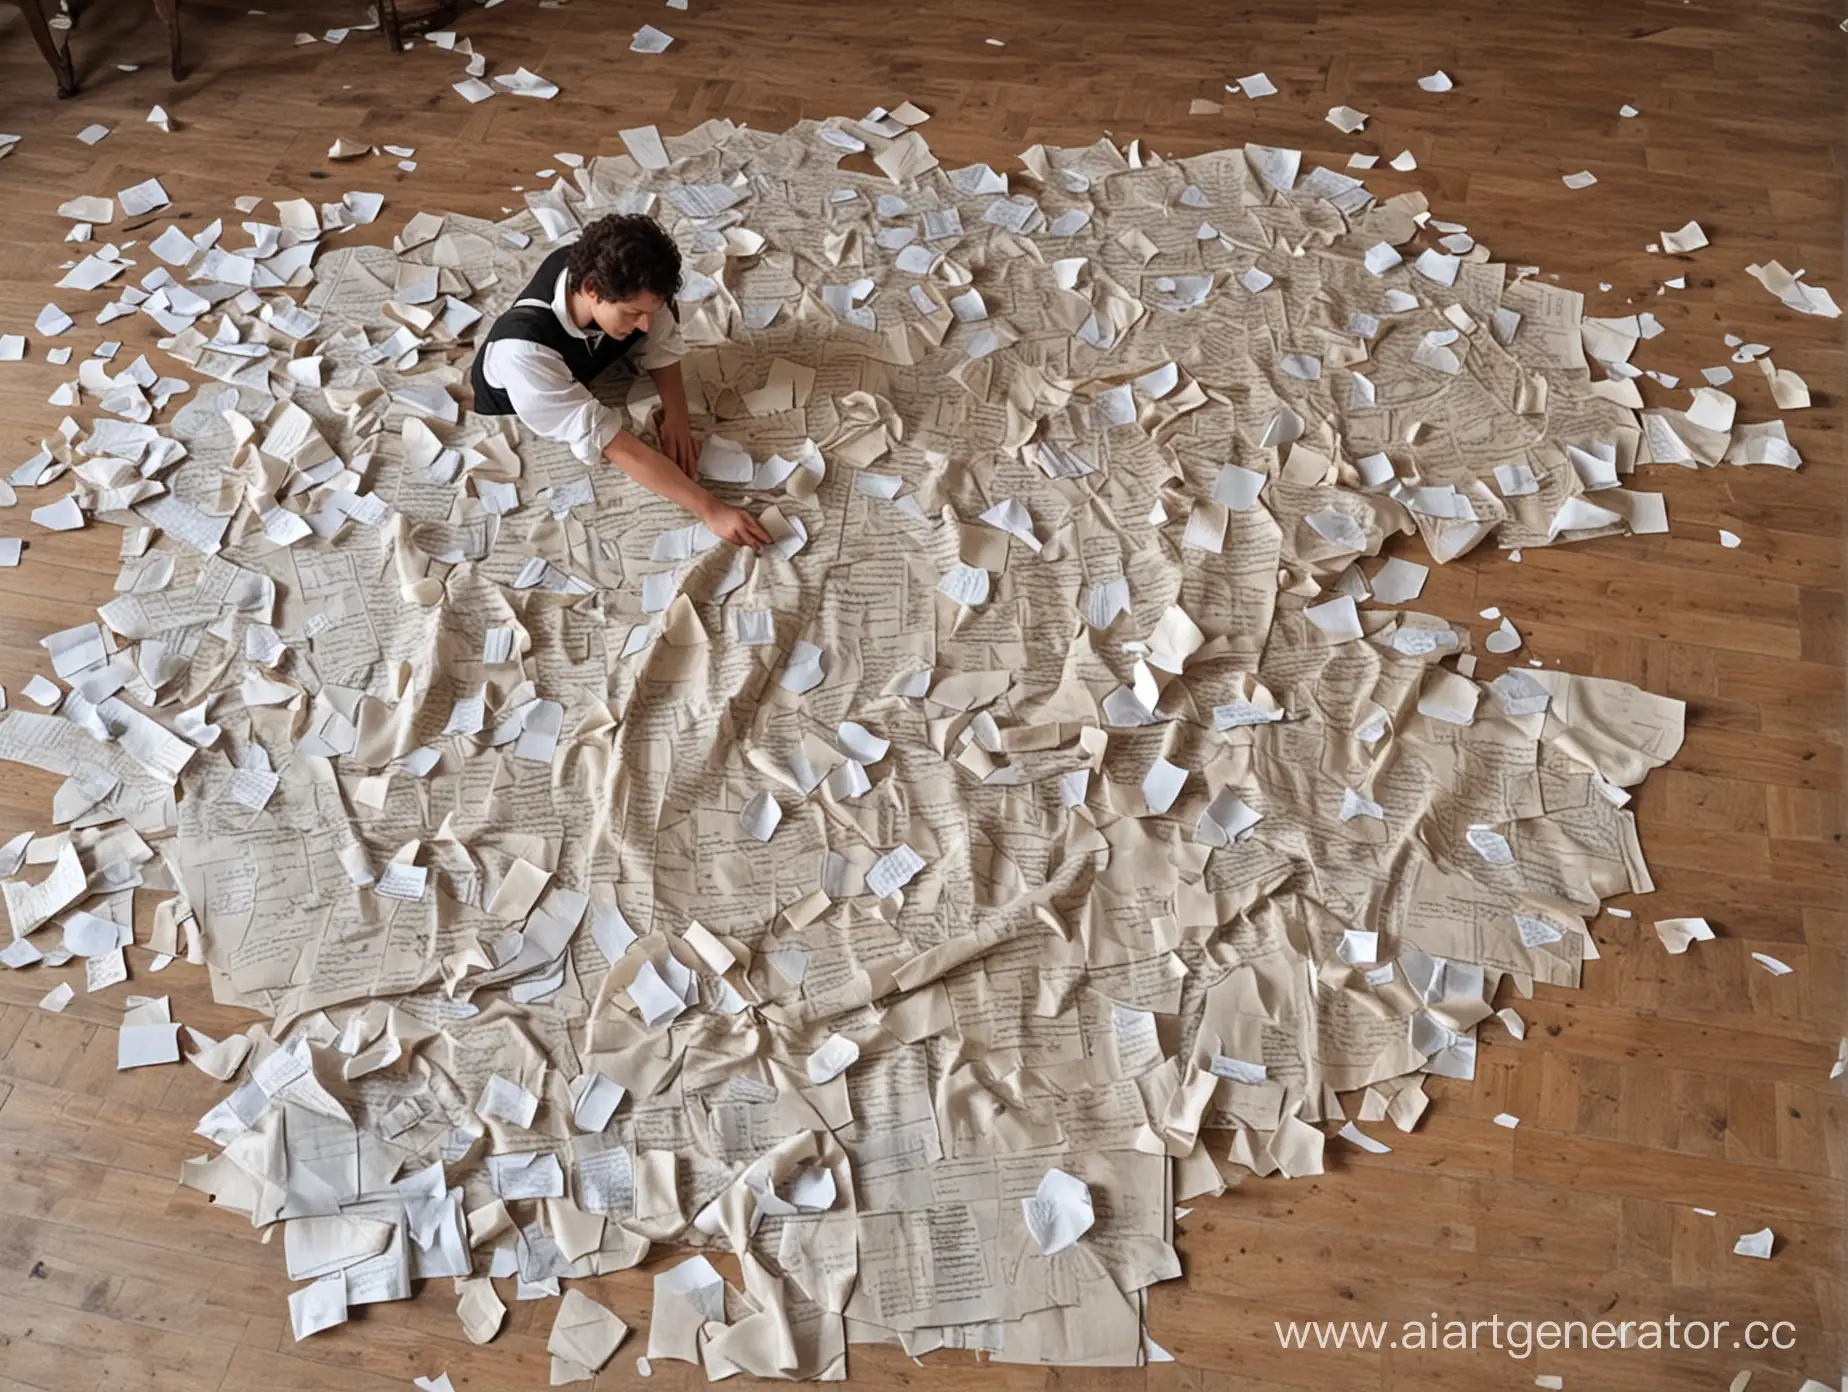 draw Pushkin struggling to write a poem, there are lots of crumpled sheets of paper on the floor